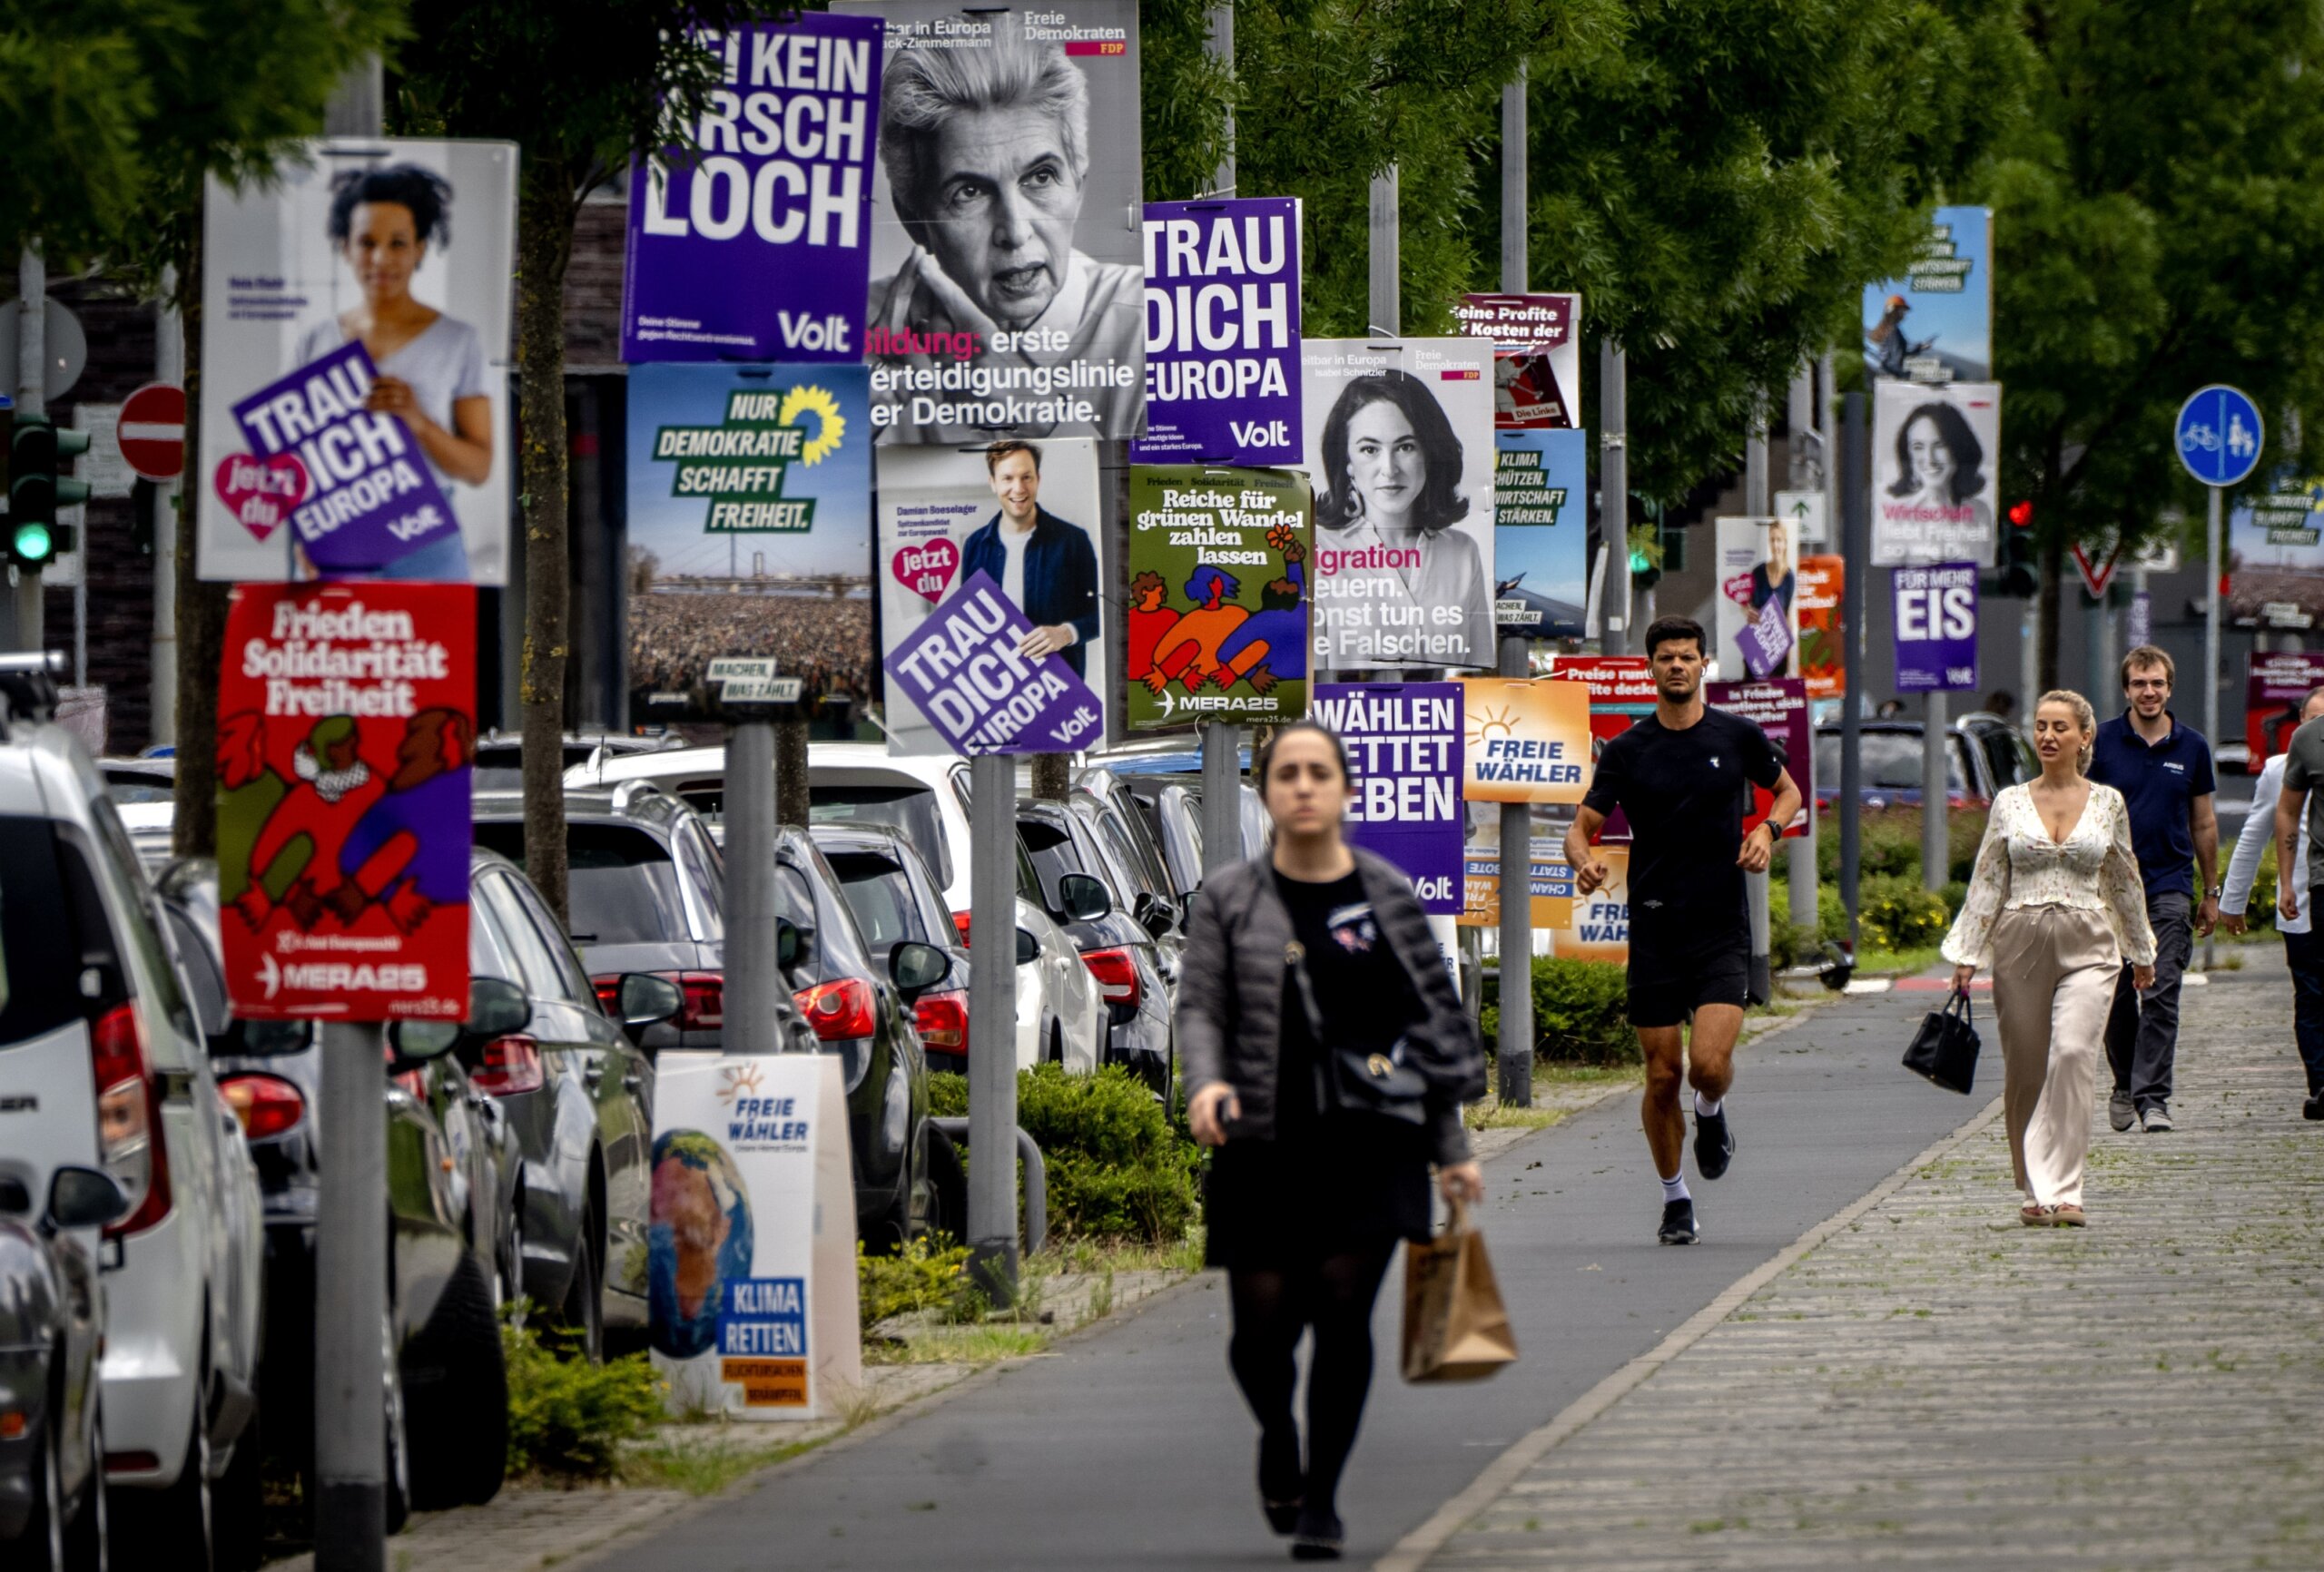 Here are some key races to watch in the EU Parliament elections